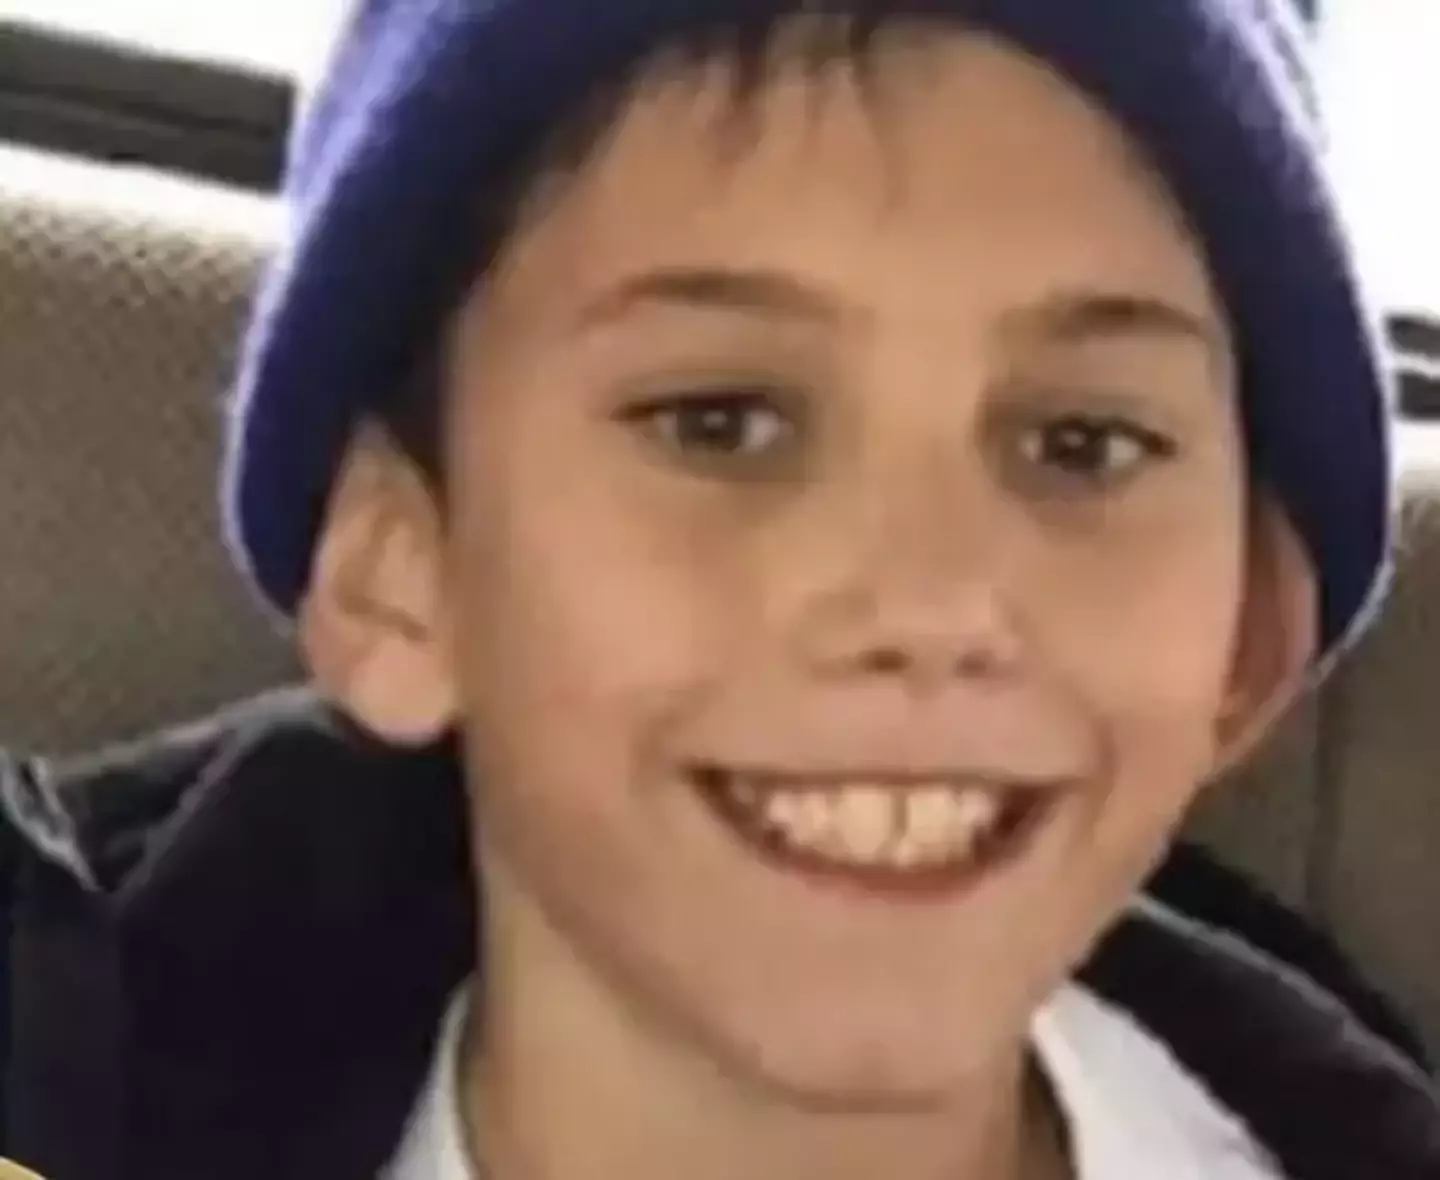 11-year-old Gannon Stauch was murdered by his stepmother in 2020.